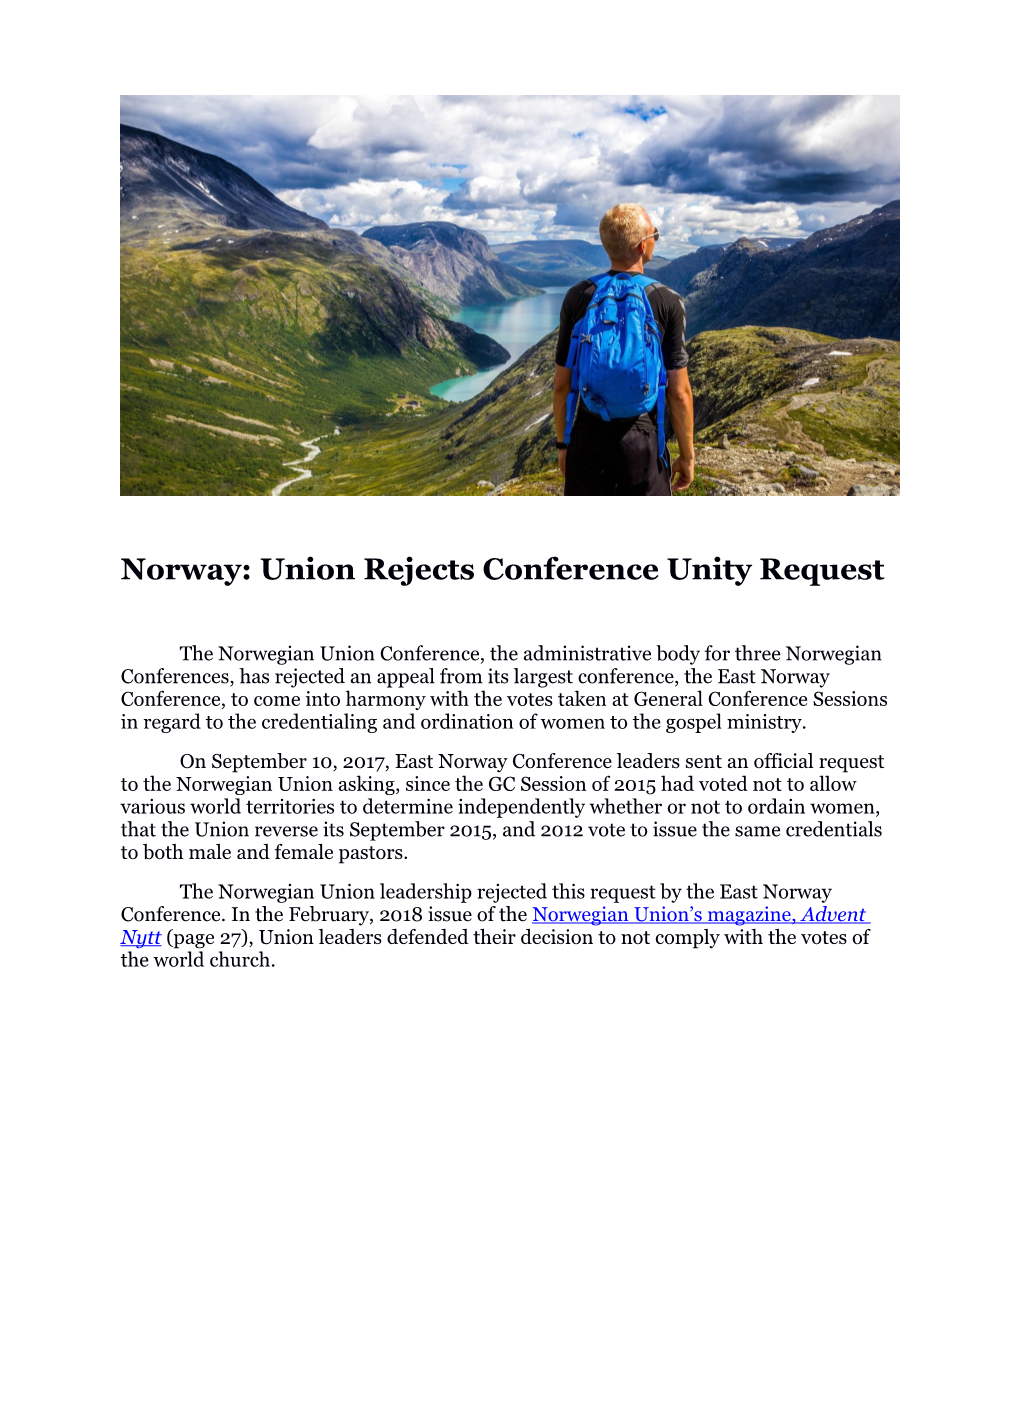 Norway: Union Rejects Conference Unity Request